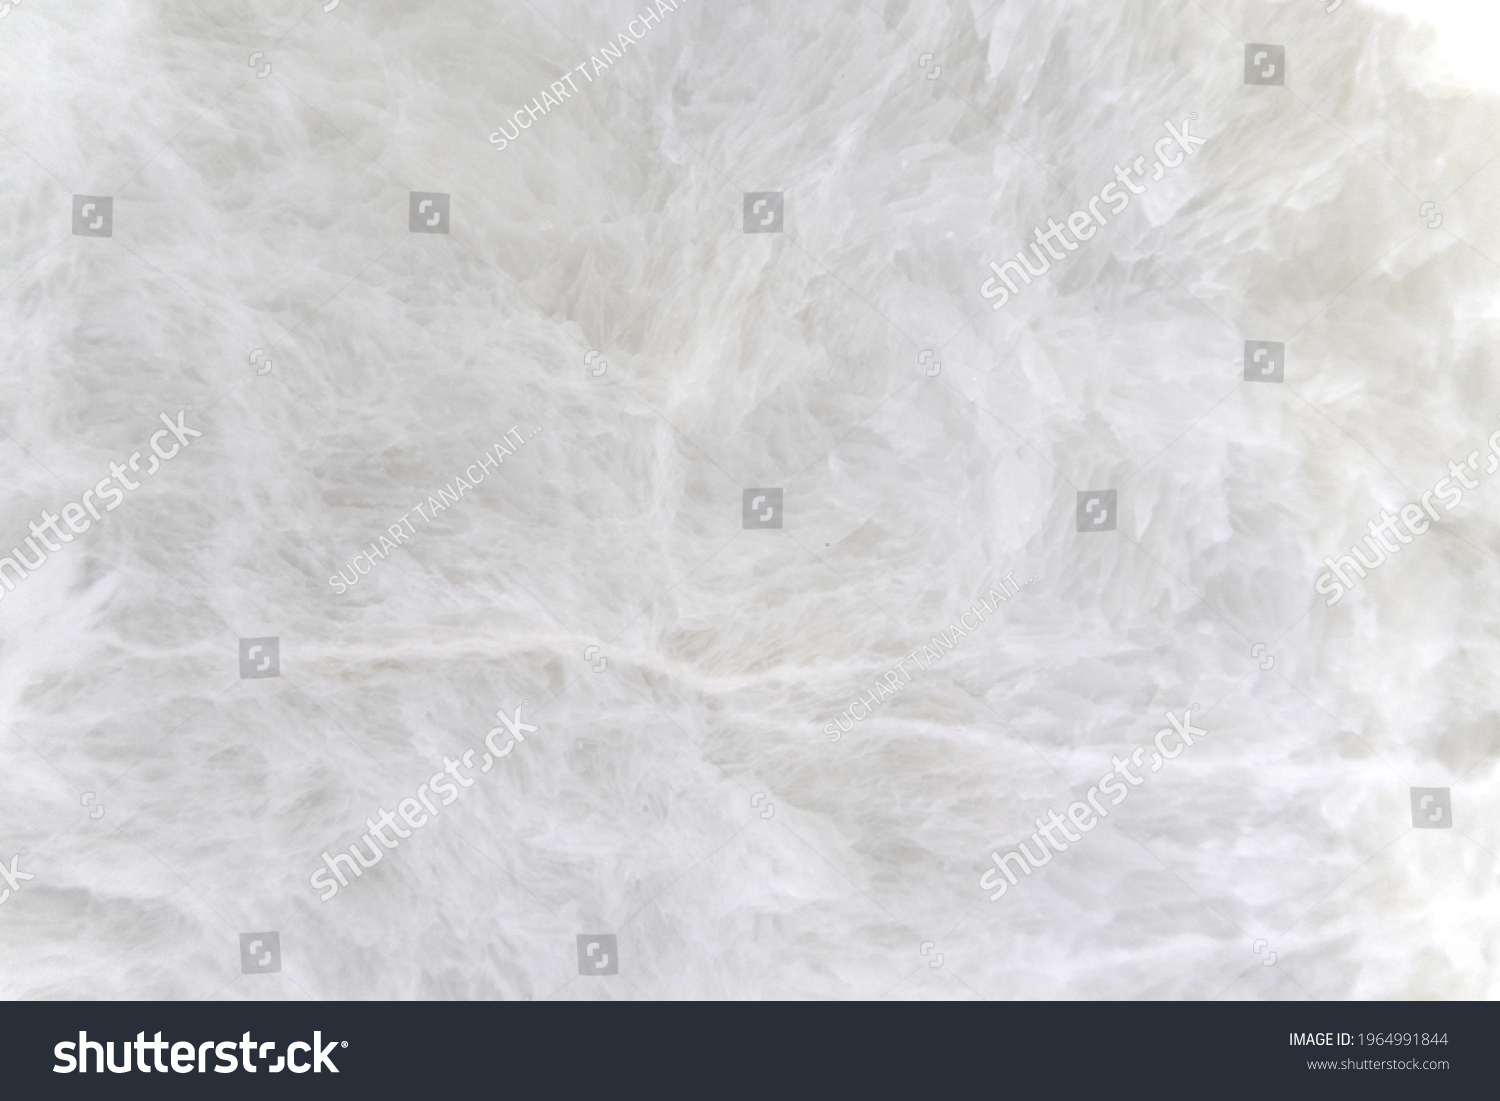 defocus of pattern inside of nature stone for background. #1964991844